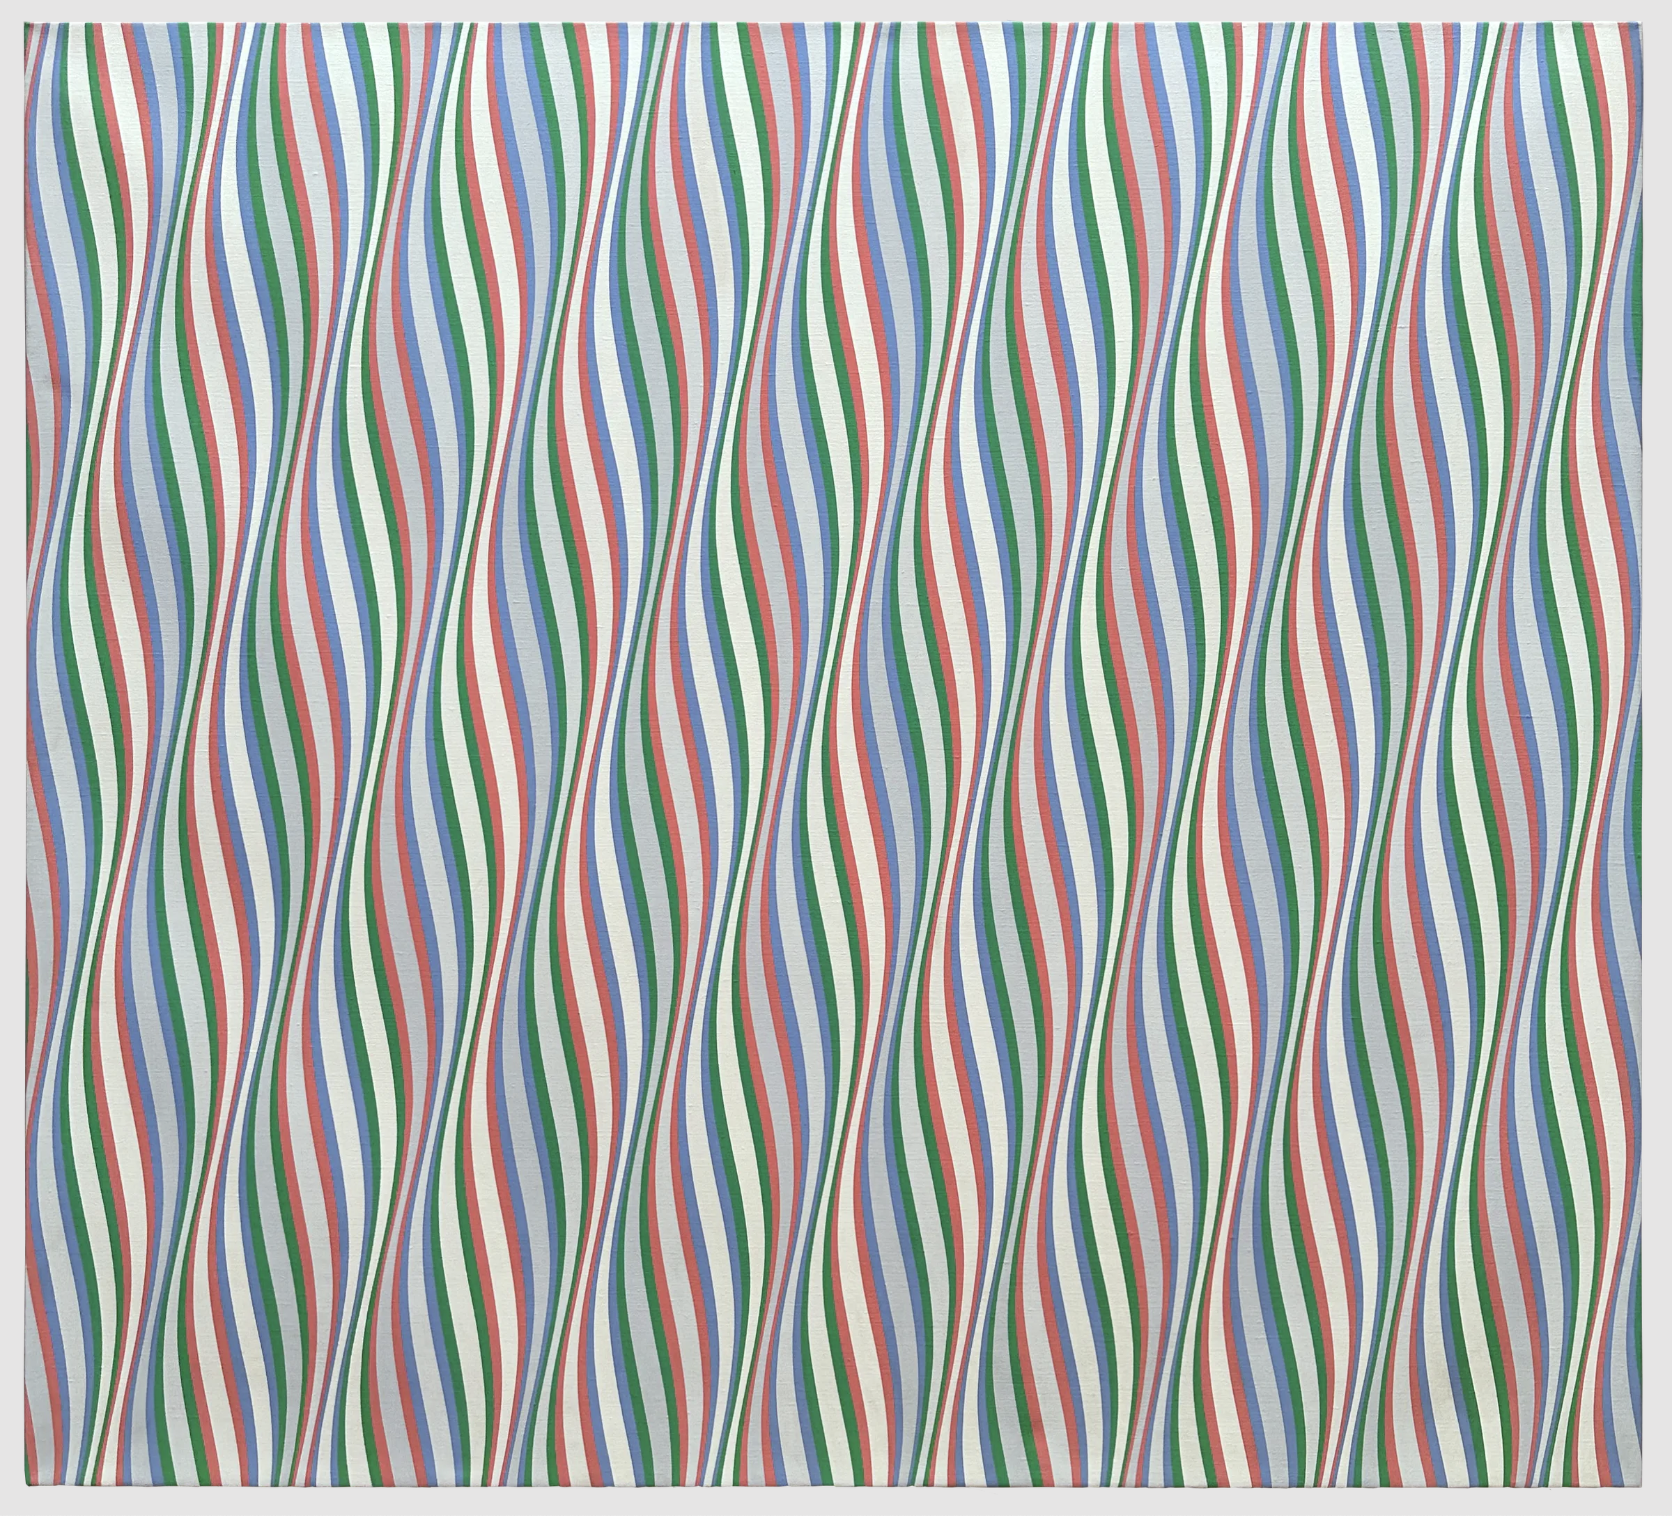 An untitled painting by Bridget Riley, dated 1974.